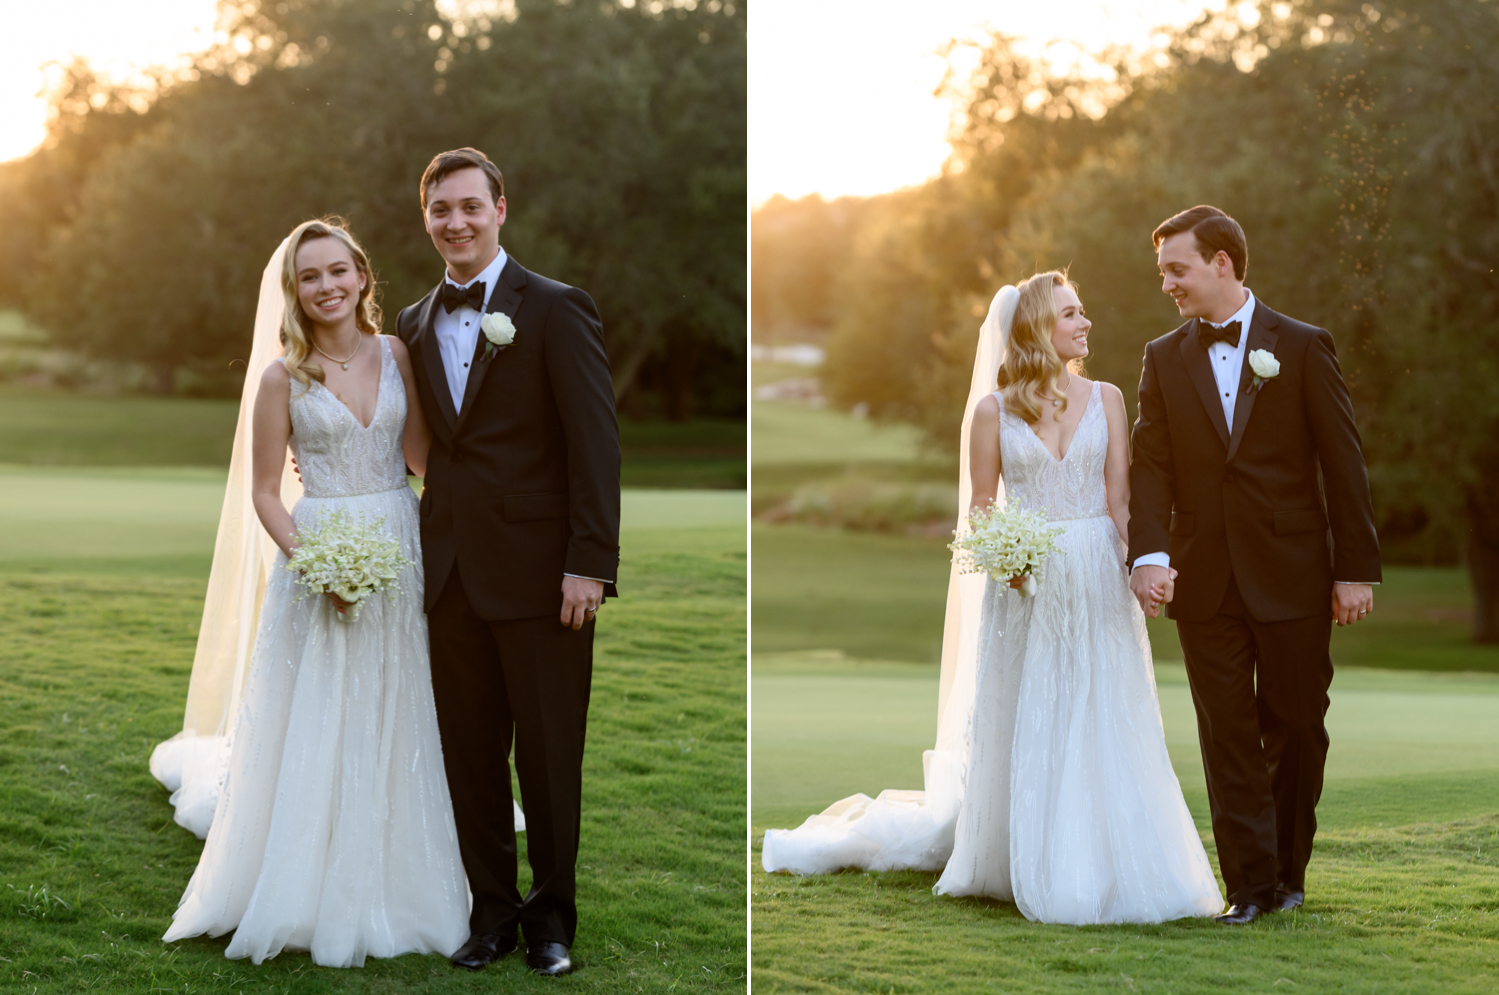 Left: The bride and groom smile at the camera on the golf course. Right: The bride and groom and hold hands and smile on the golf course